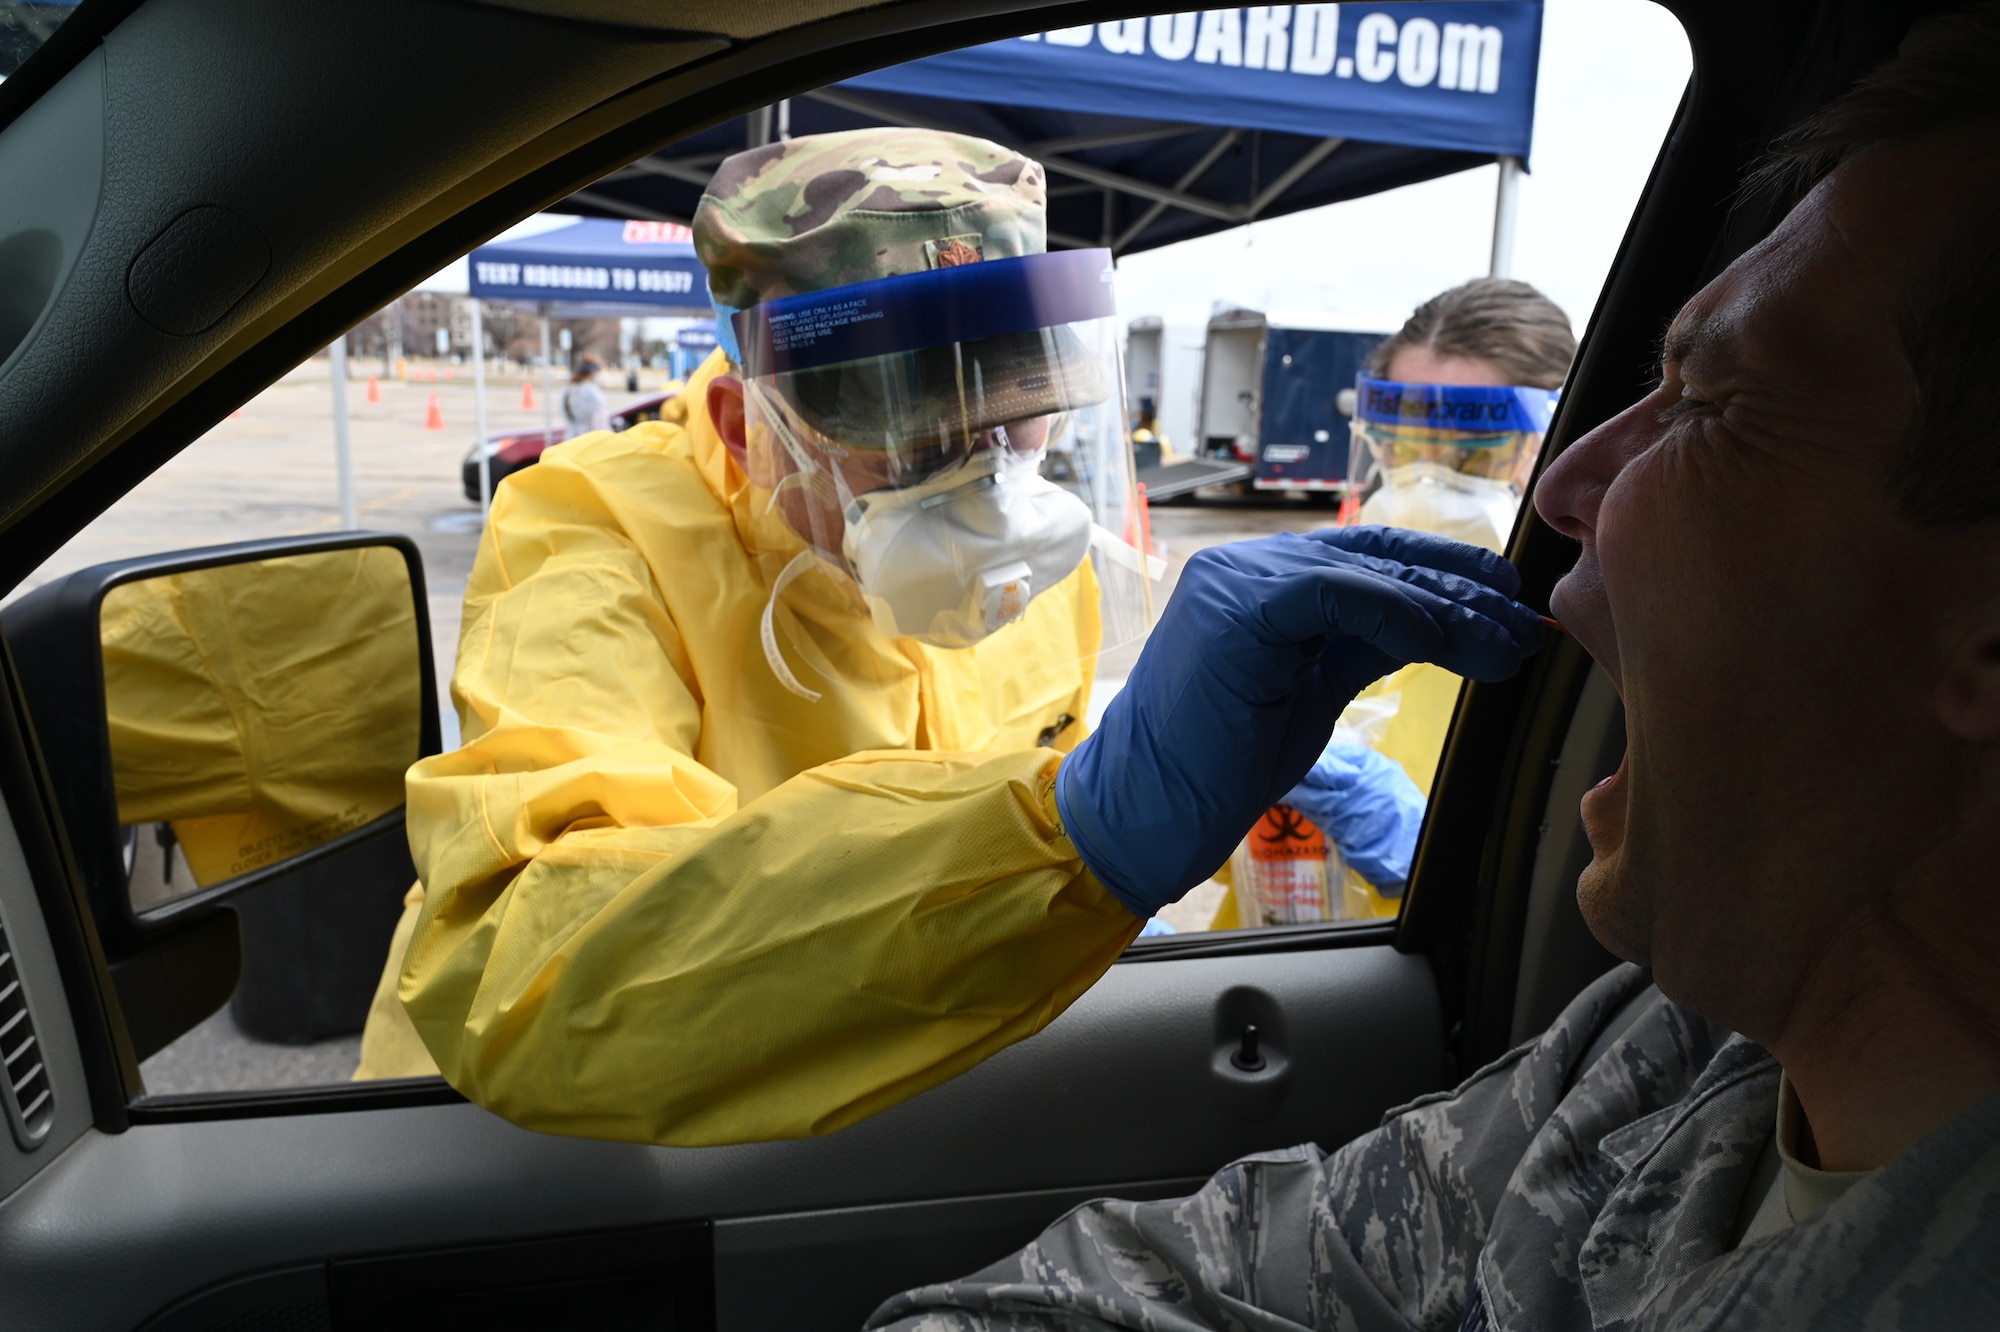 U.S. Air Force Maj. Chad Brooks, of the 119th Medical Group, takes a sample swab from an asymptomatic volunteer who is taking a COVID-19 test in the parking lot of the Alerus Center, Grand Forks, North Dakota, April 23, 2020. He’s wearing personal protective equipment to stay safe while he works, and to help prevent the spread of COVID-19 while testing people as they drive through in their vehicles. He is just one of the many North Dakota National Guard members partnering with the North Dakota  Department of Health and other civilian agencies in support of the community response to the COVID-19 pandemic. (U.S. Air National Guard photo by David H. Lipp)